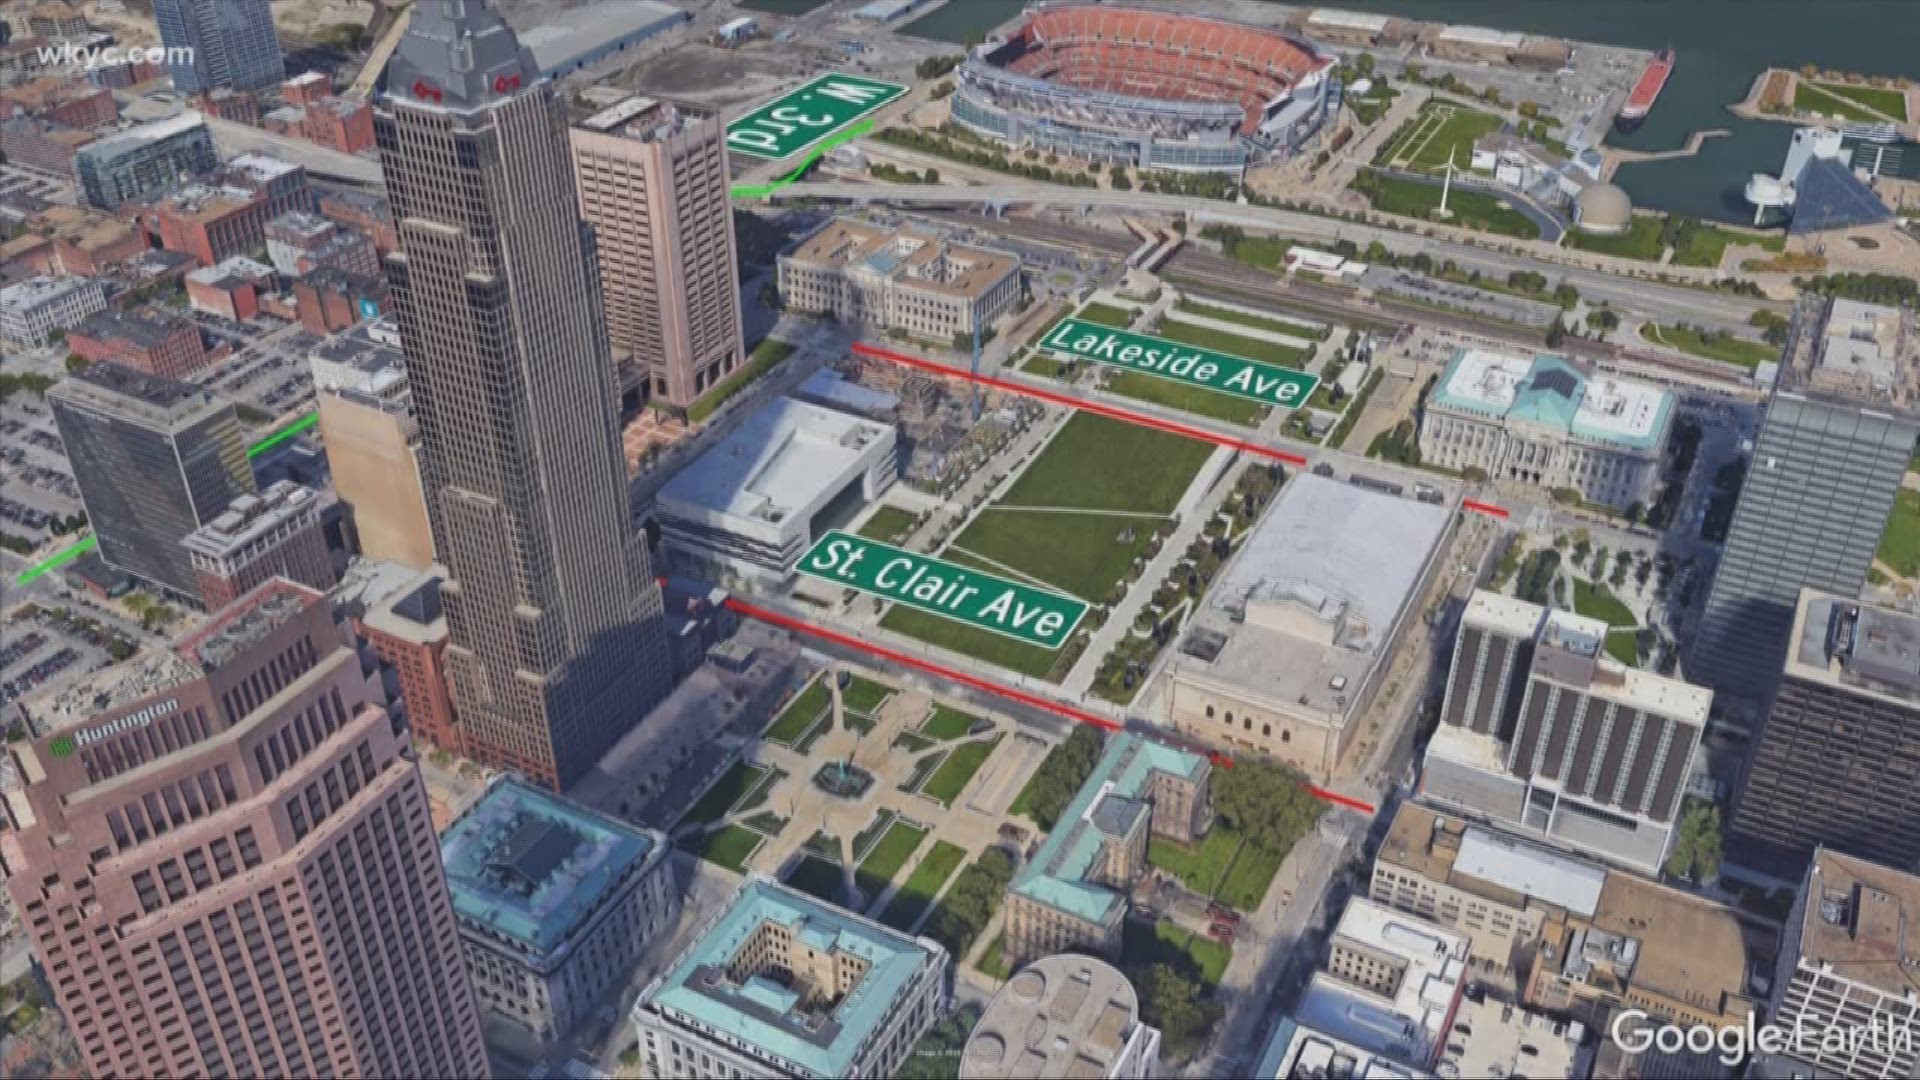 Channel 3's Brandon Simmons gives a rundown of some of the parking challenges you'll face coming into downtown Cleveland for July 4th fireworks.